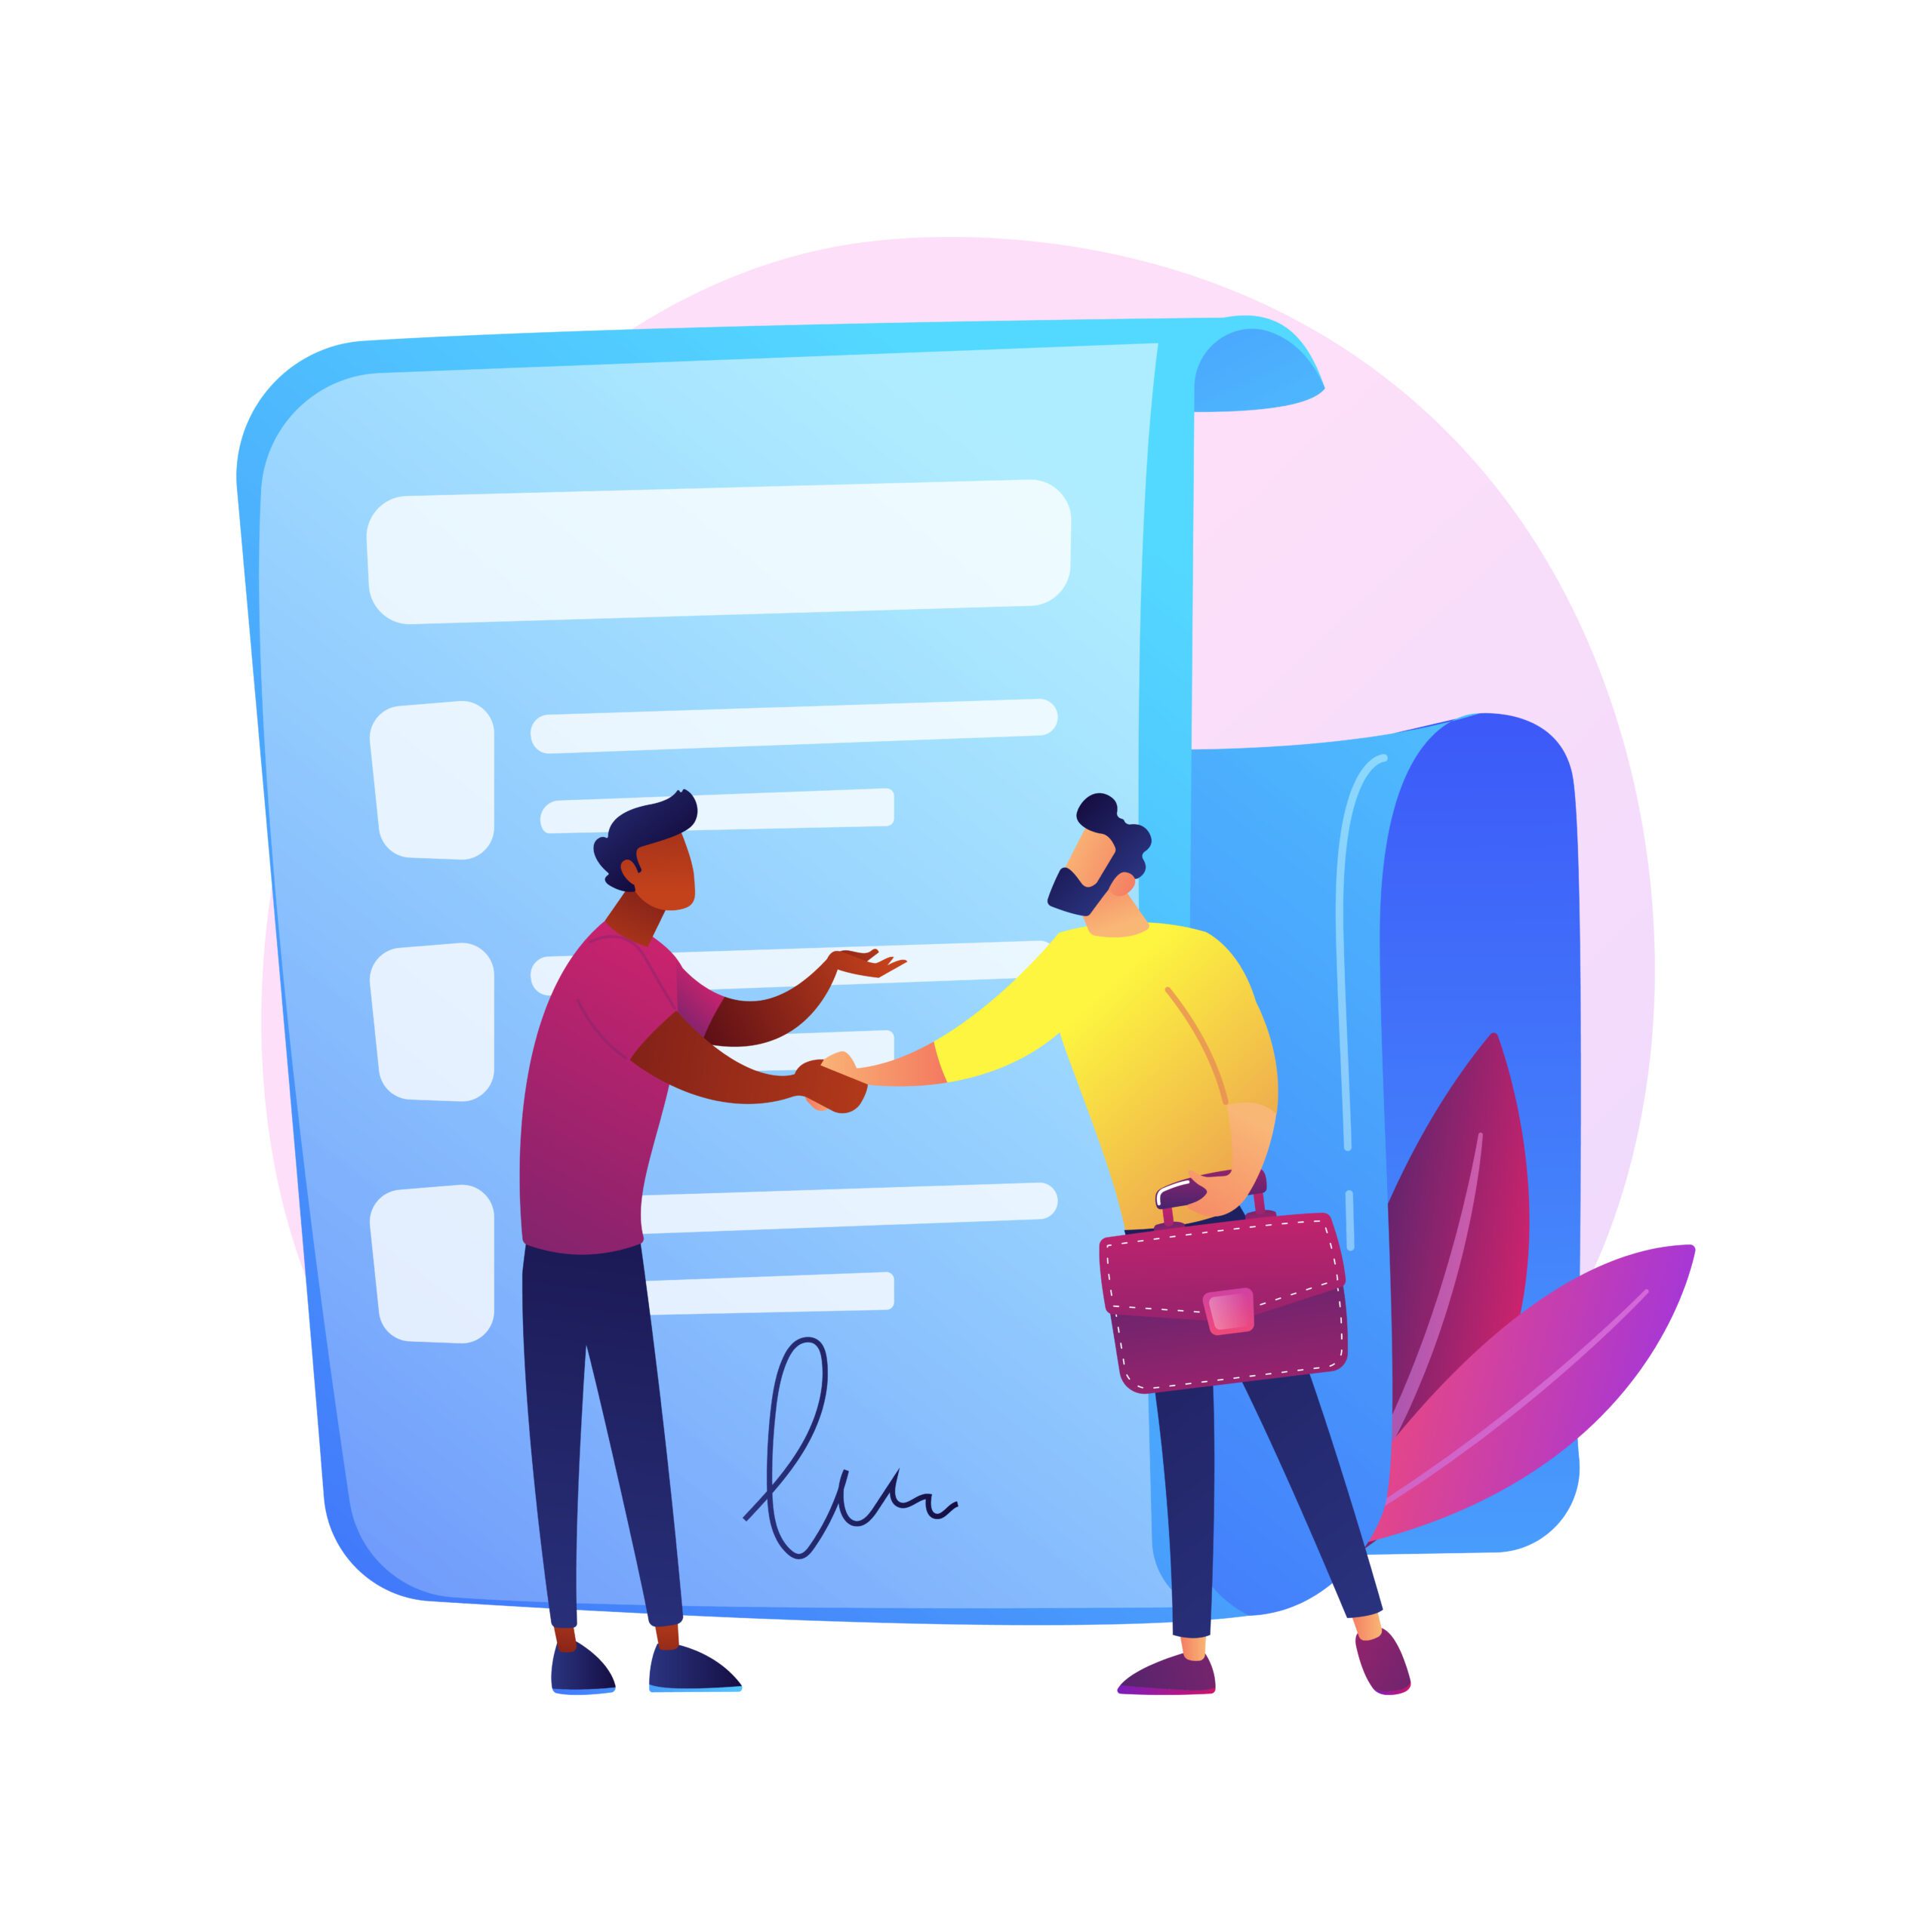 Signing contract. Official document, agreement, deal commitment. Businessmen cartoon characters shaking hands. Legal contract with signature. Vector isolated concept metaphor illustration